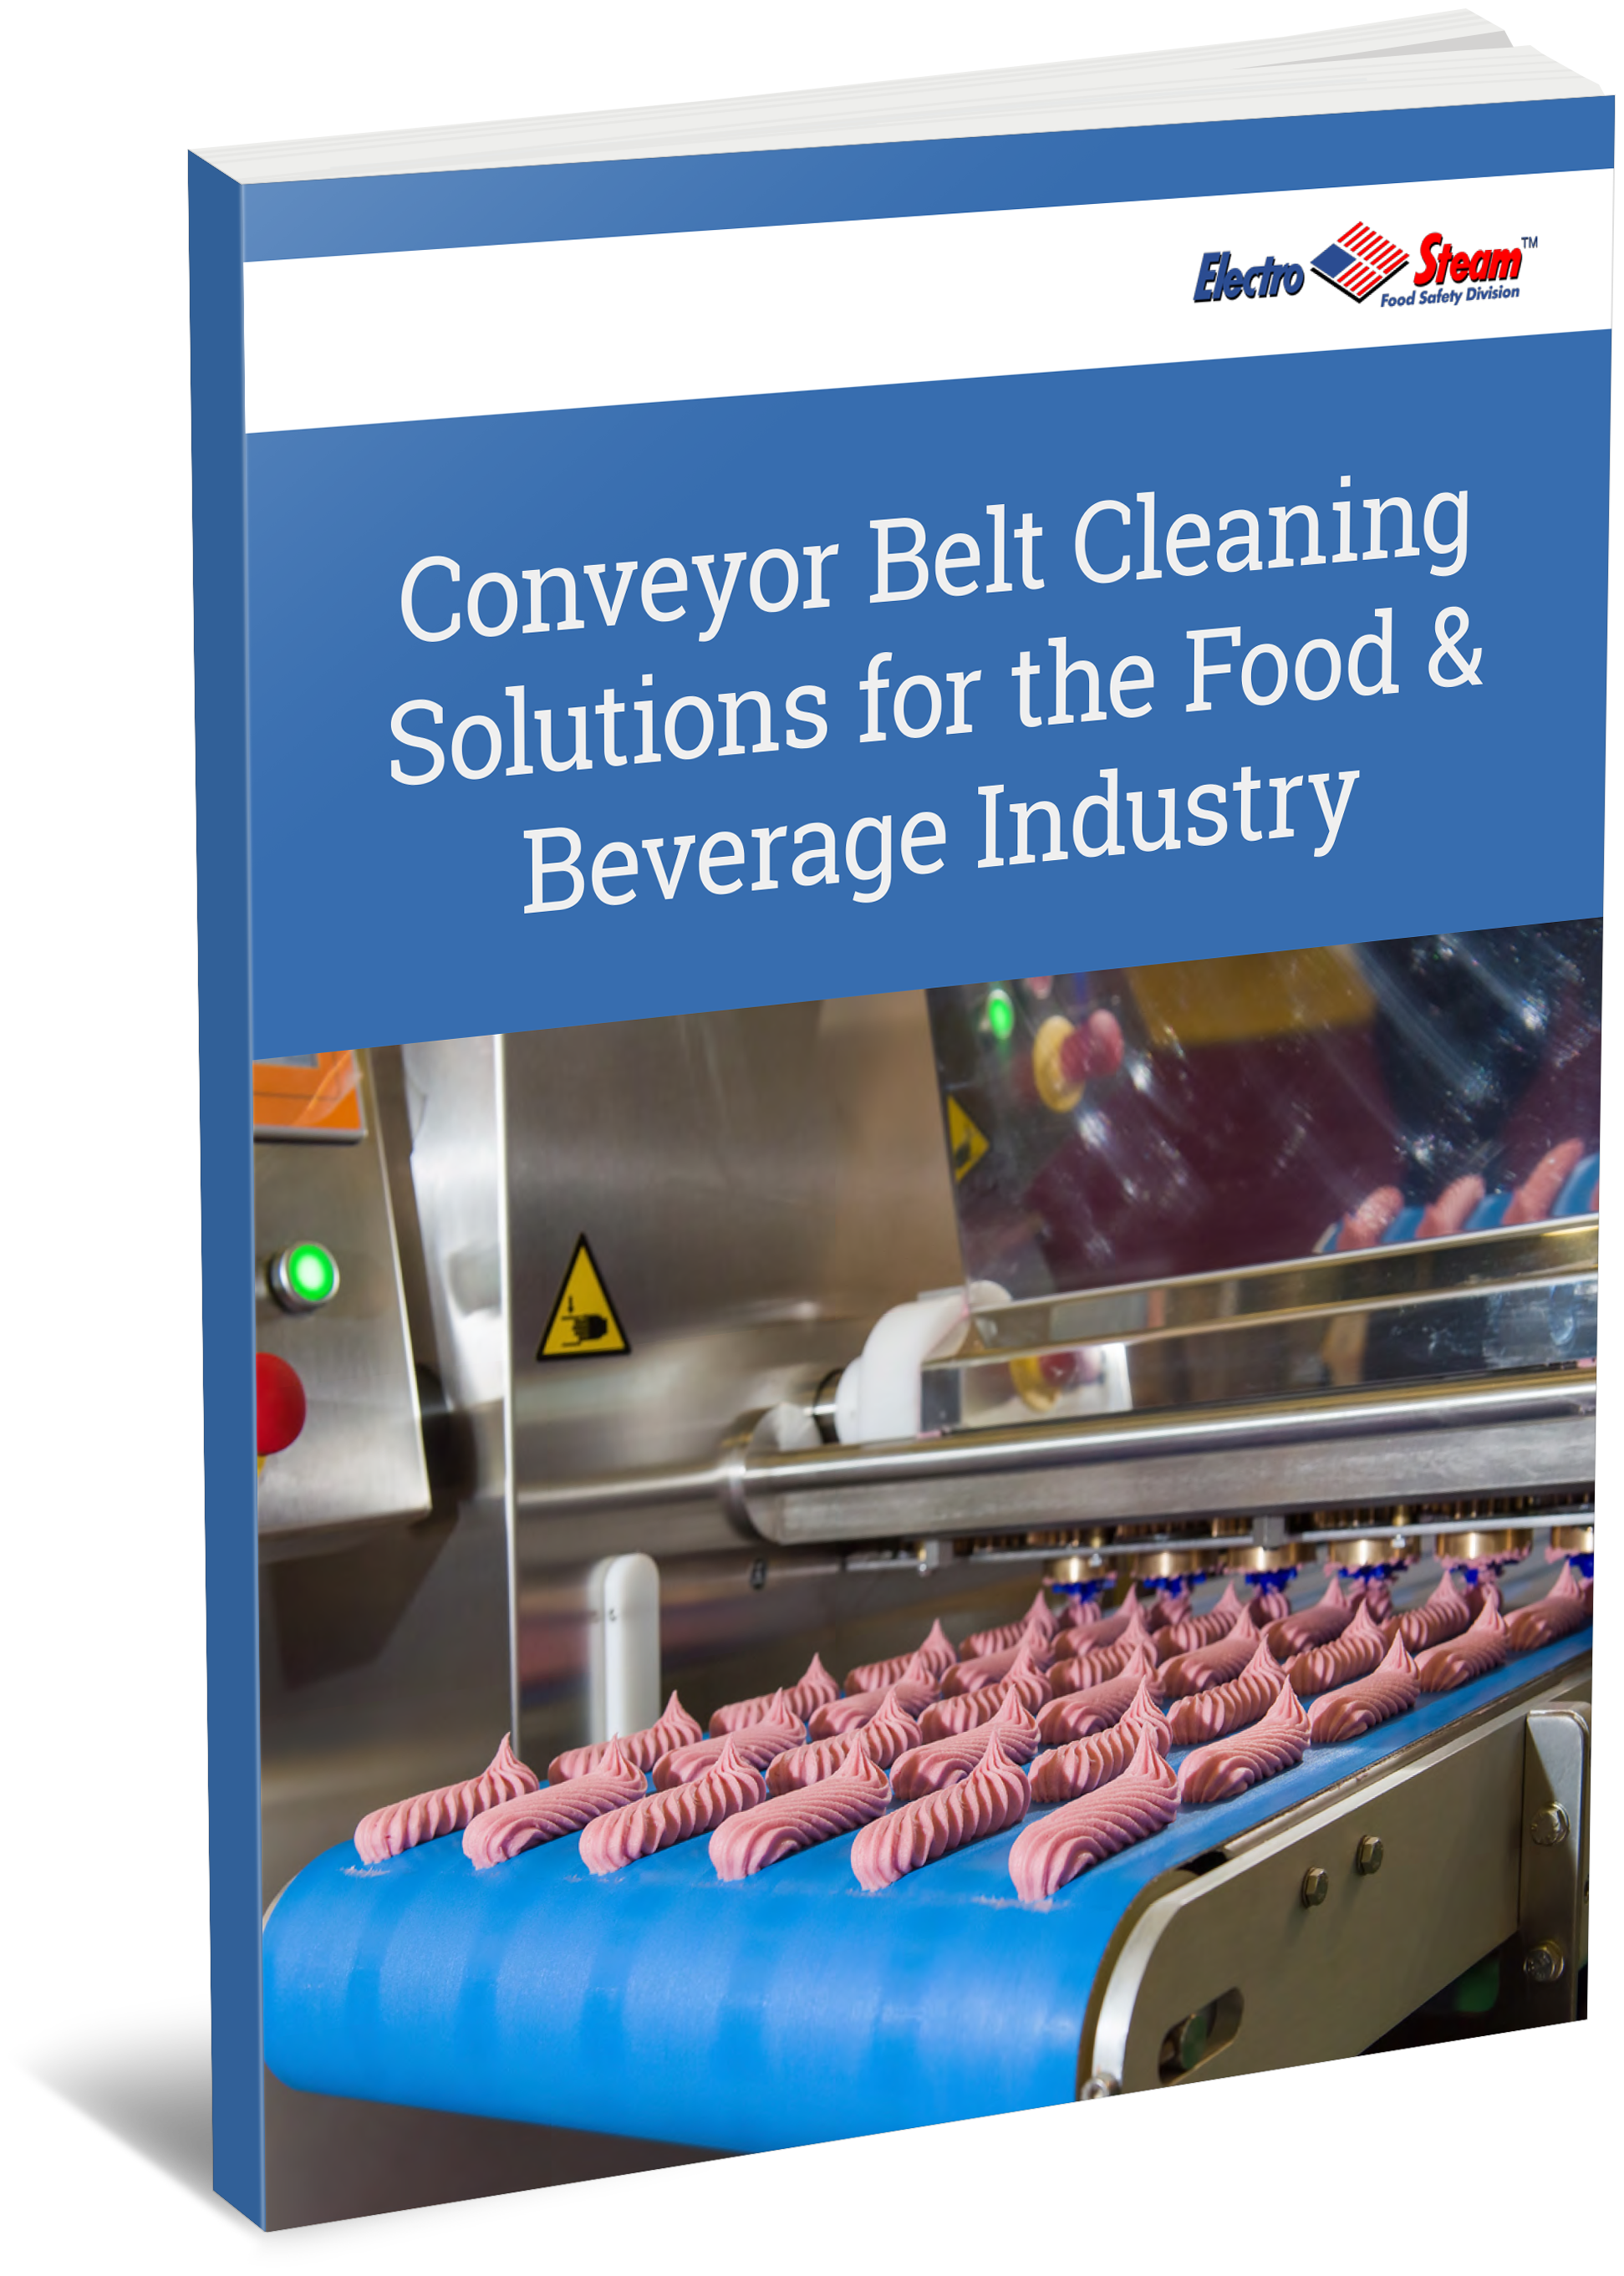 https://5066334.fs1.hubspotusercontent-na1.net/hubfs/5066334/3D-Cover-Conveyor-Belt-Cleaning-Solutions-for-the-Food-&-Beverage-Industry.png